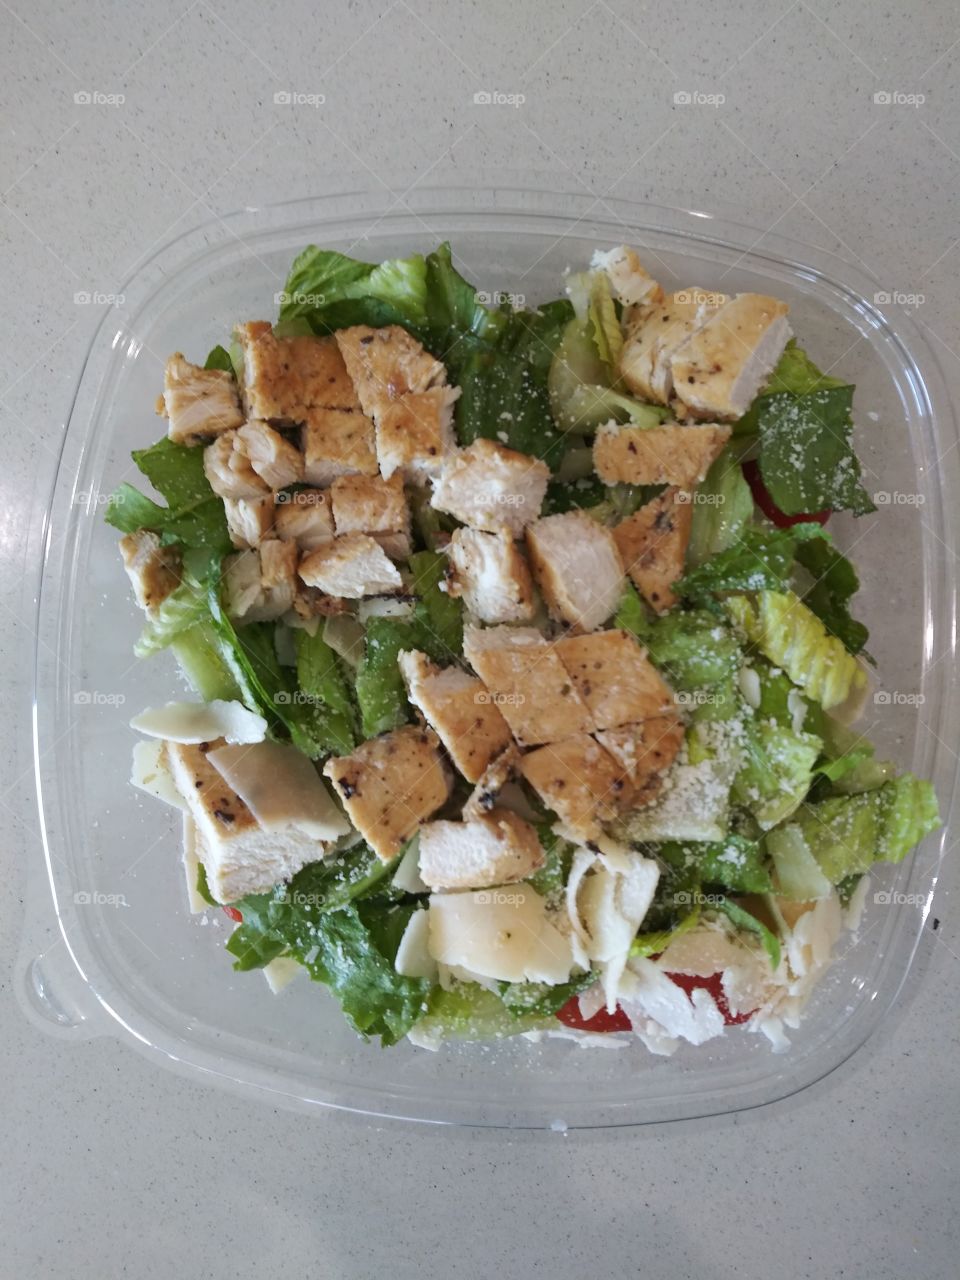 Wendy's parmesan caesar chickensalad is made using chopped romainelettuce, grape tomatoes and an all-white meat, grilled chicken breast. The new go-to fast food caesar salad is topped with a blend of asiago,parmesan and romano cheese,parmesan crisps